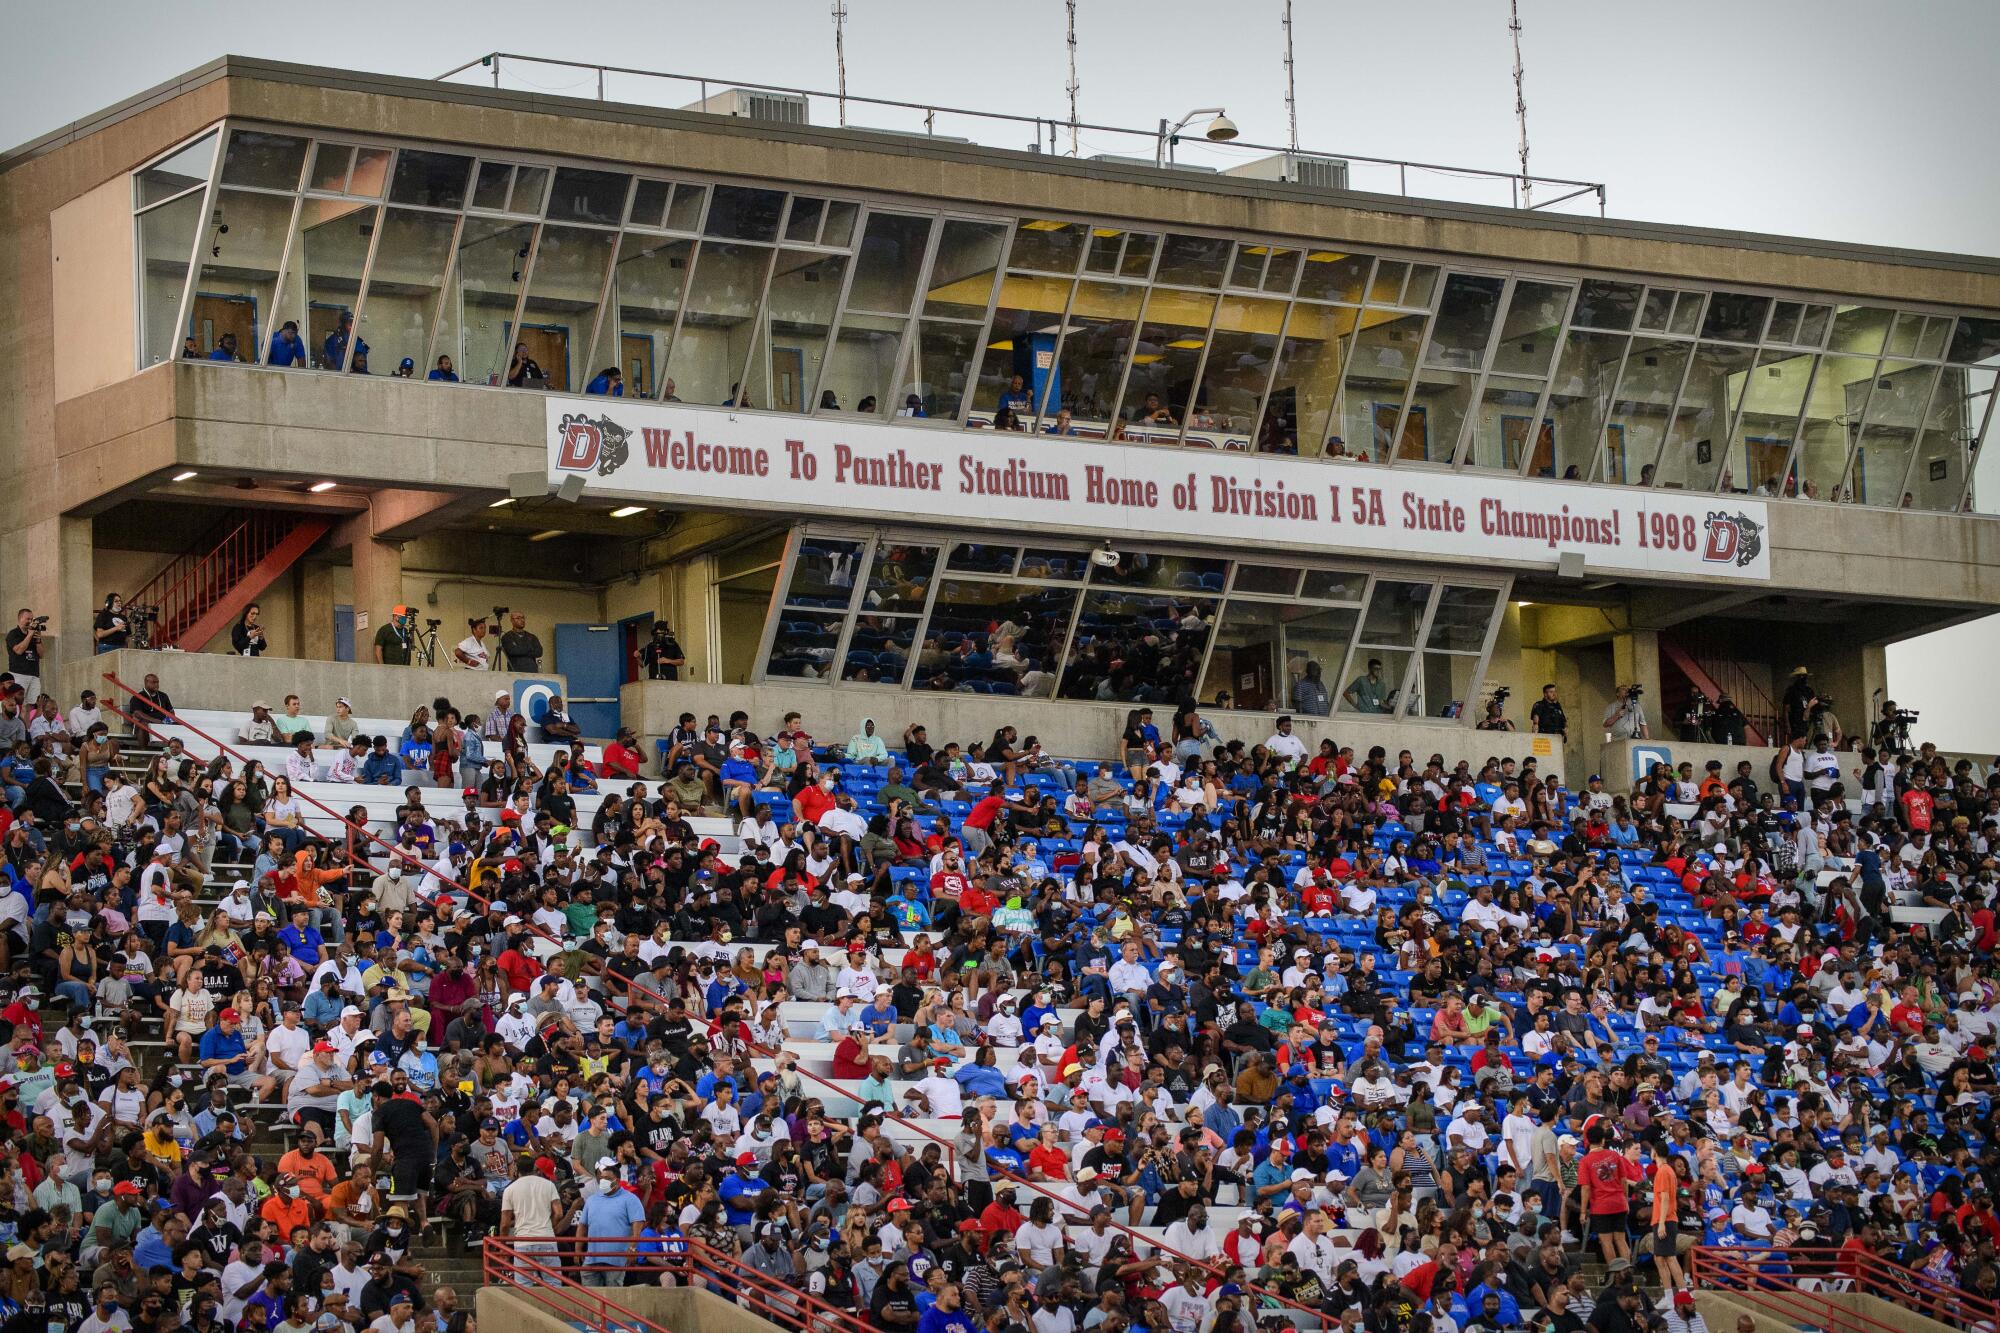 A view of the stadium and press box at Panther Stadium in Duncanville, Texas.